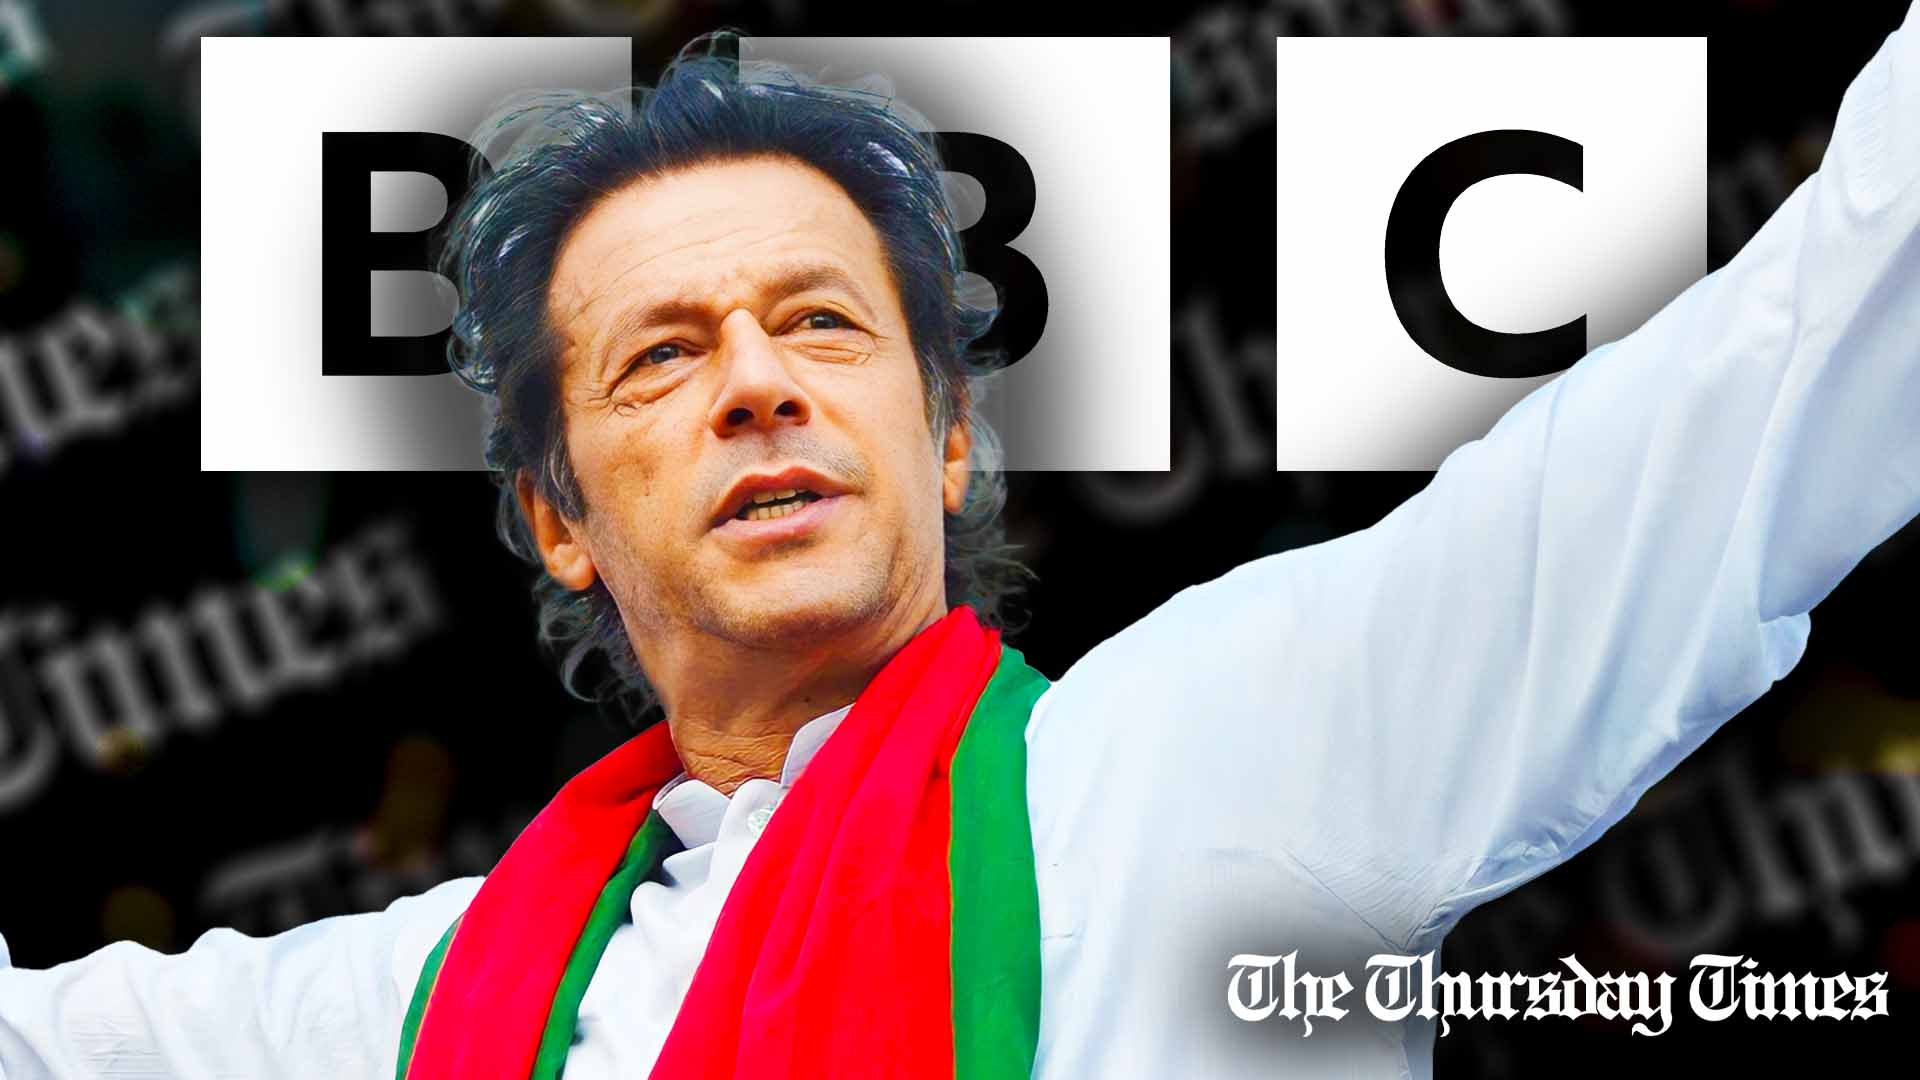 A file photo is shown of incarcerated PTI founder Imran Khan at Islamabad on August 21, 2014. — FILE/THE THURSDAY TIMES